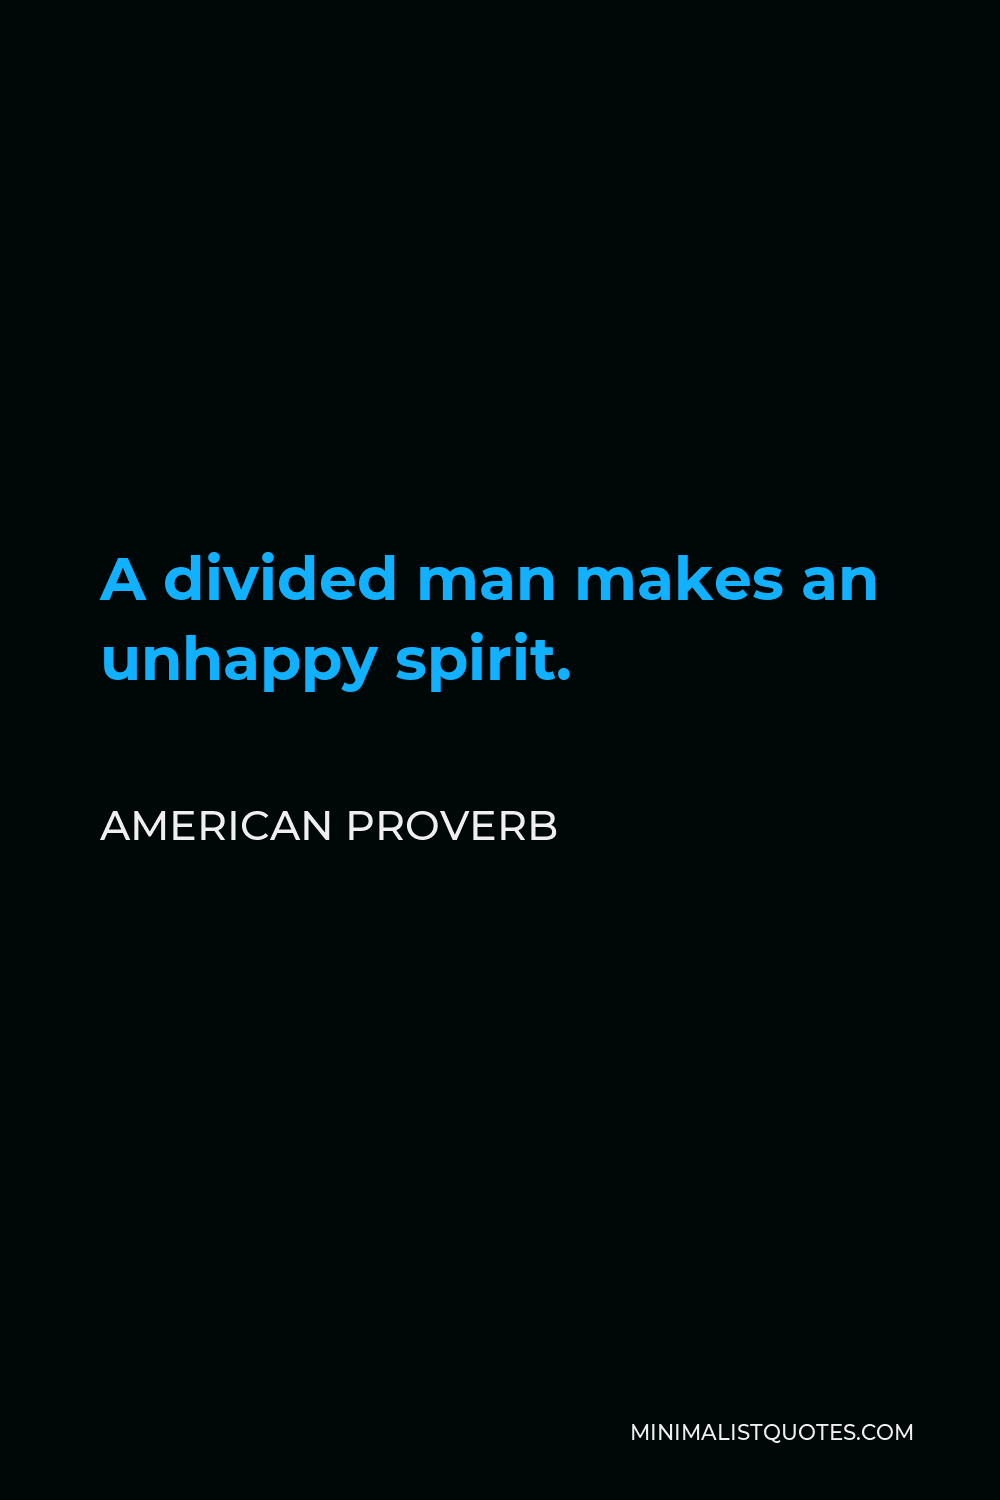 American Proverb Quote - A divided man makes an unhappy spirit.